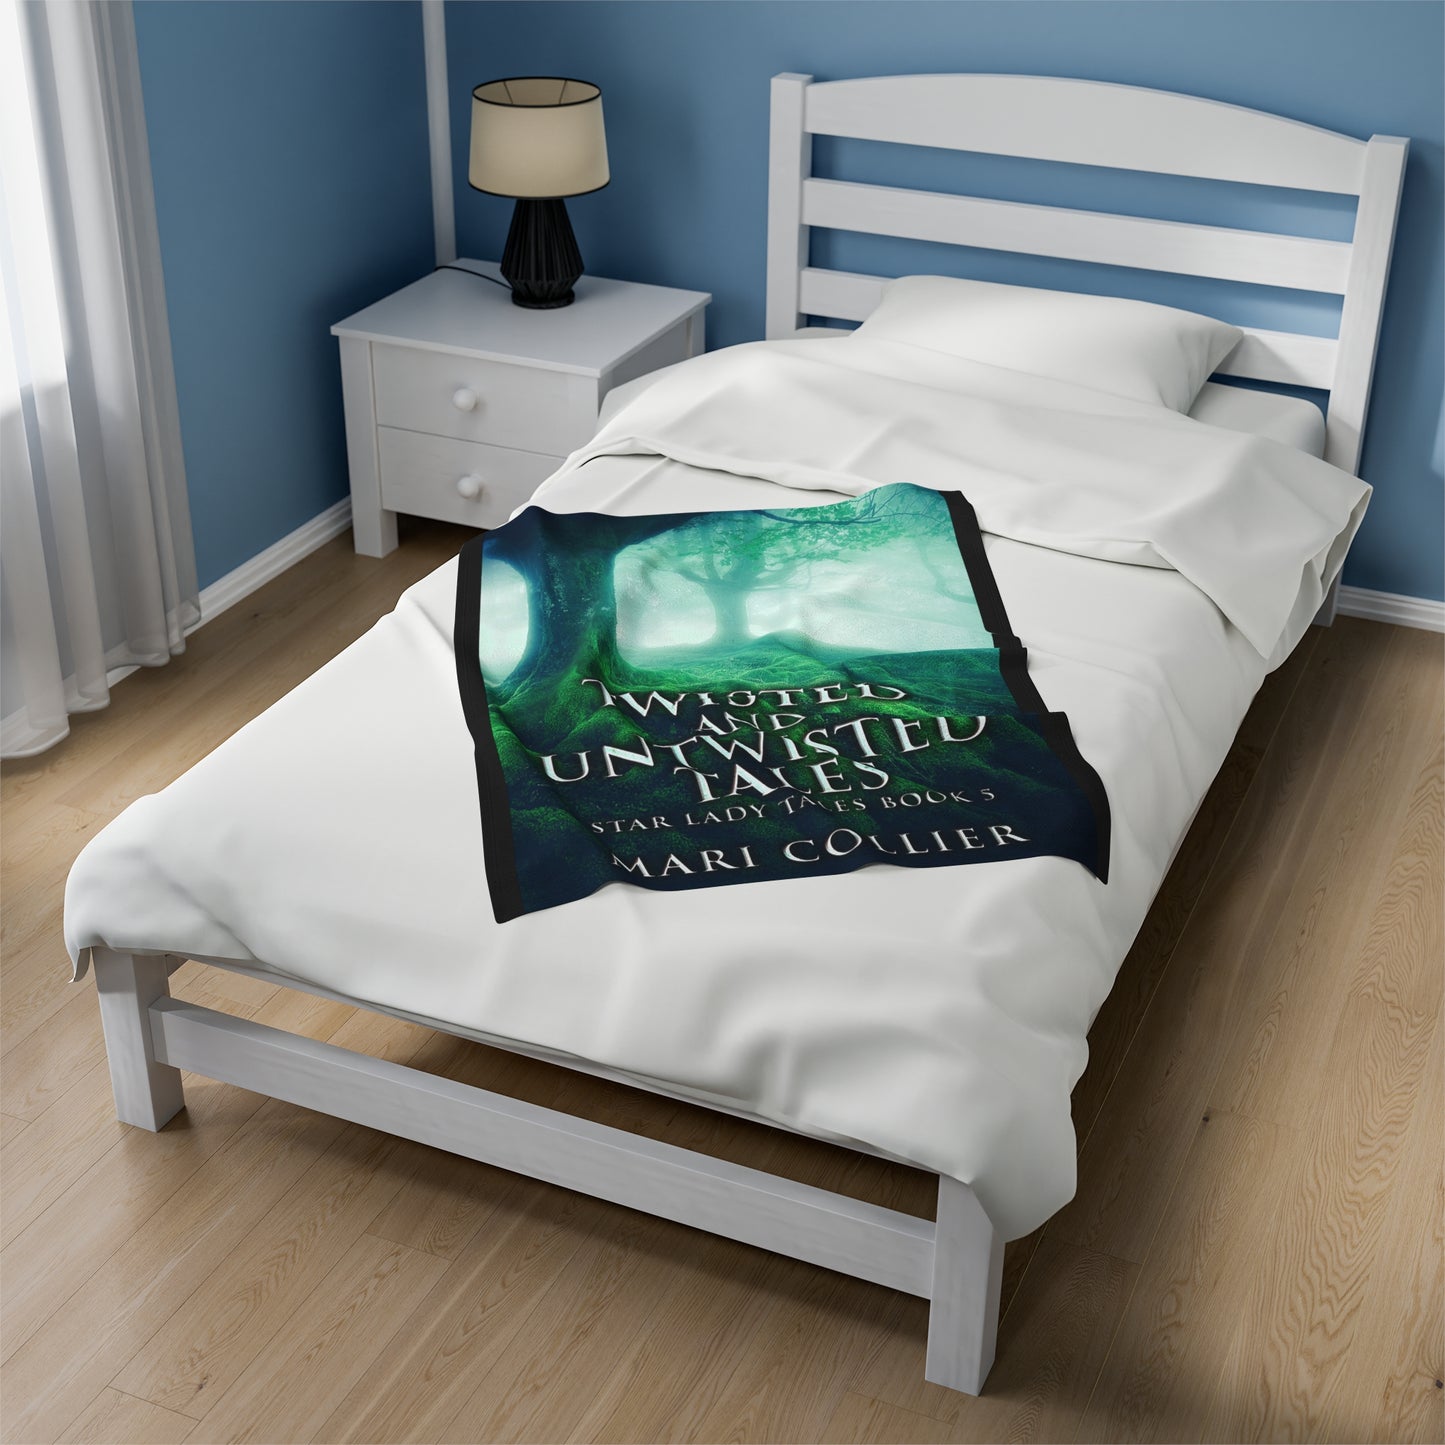 Twisted And Untwisted Tales - Velveteen Plush Blanket